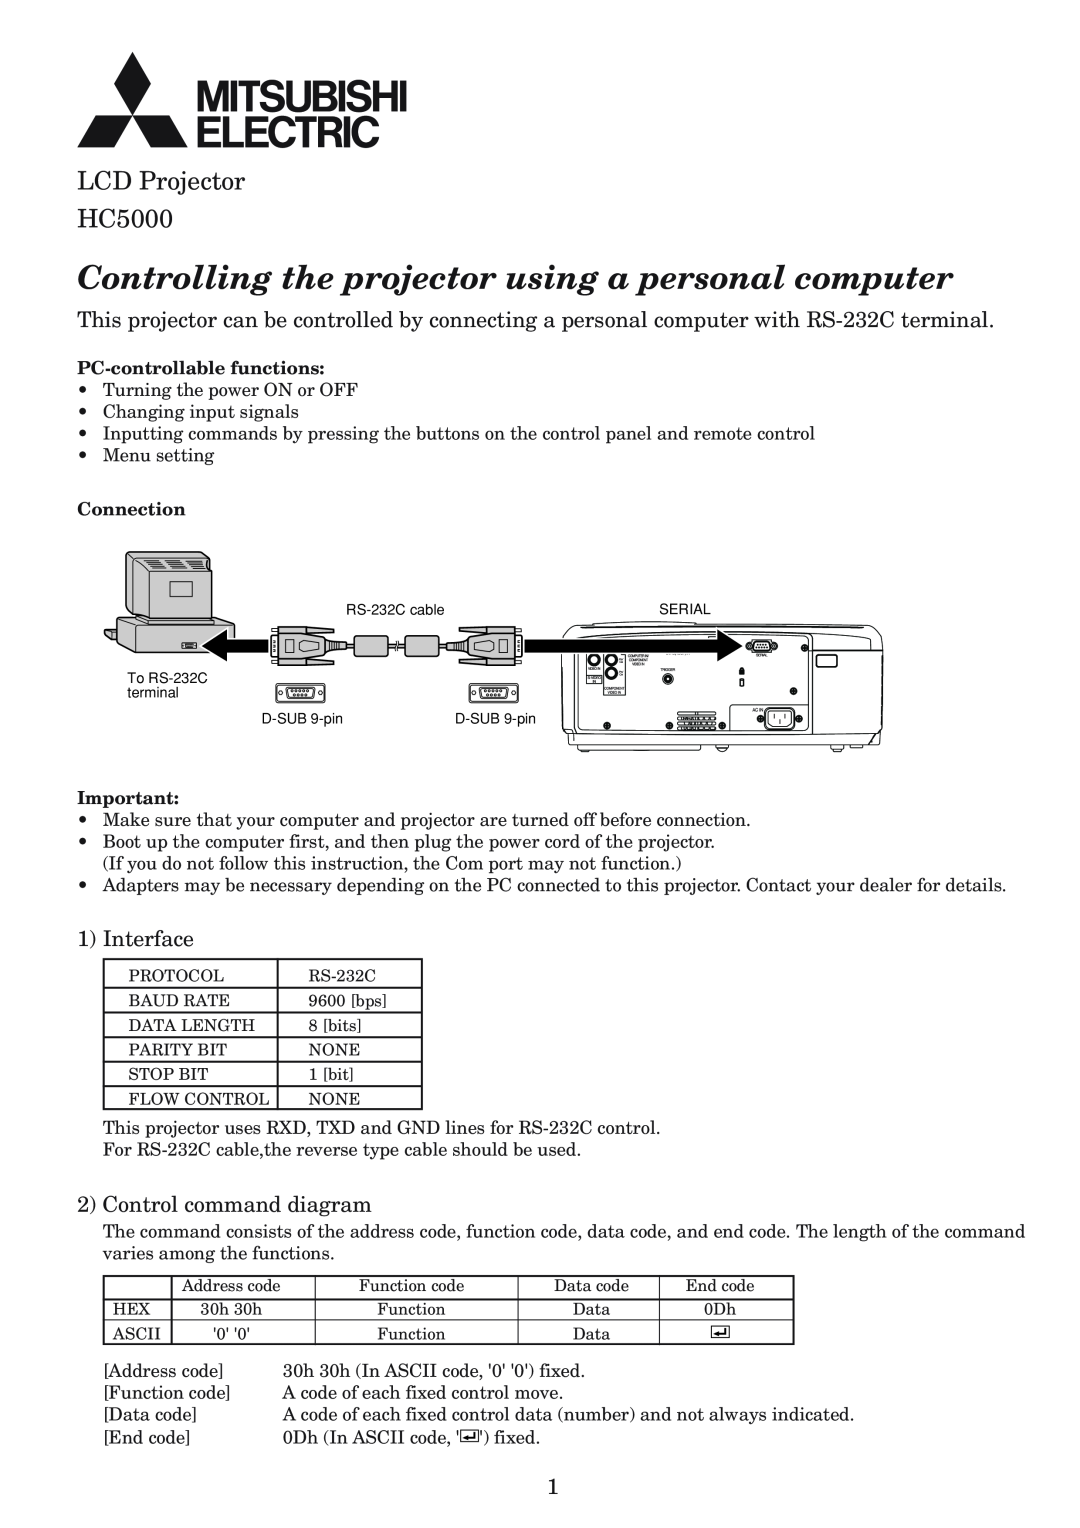 Mitsubishi Electronics HC5000 manual Interface, Control command diagram, PC-controllable functions, Connection 